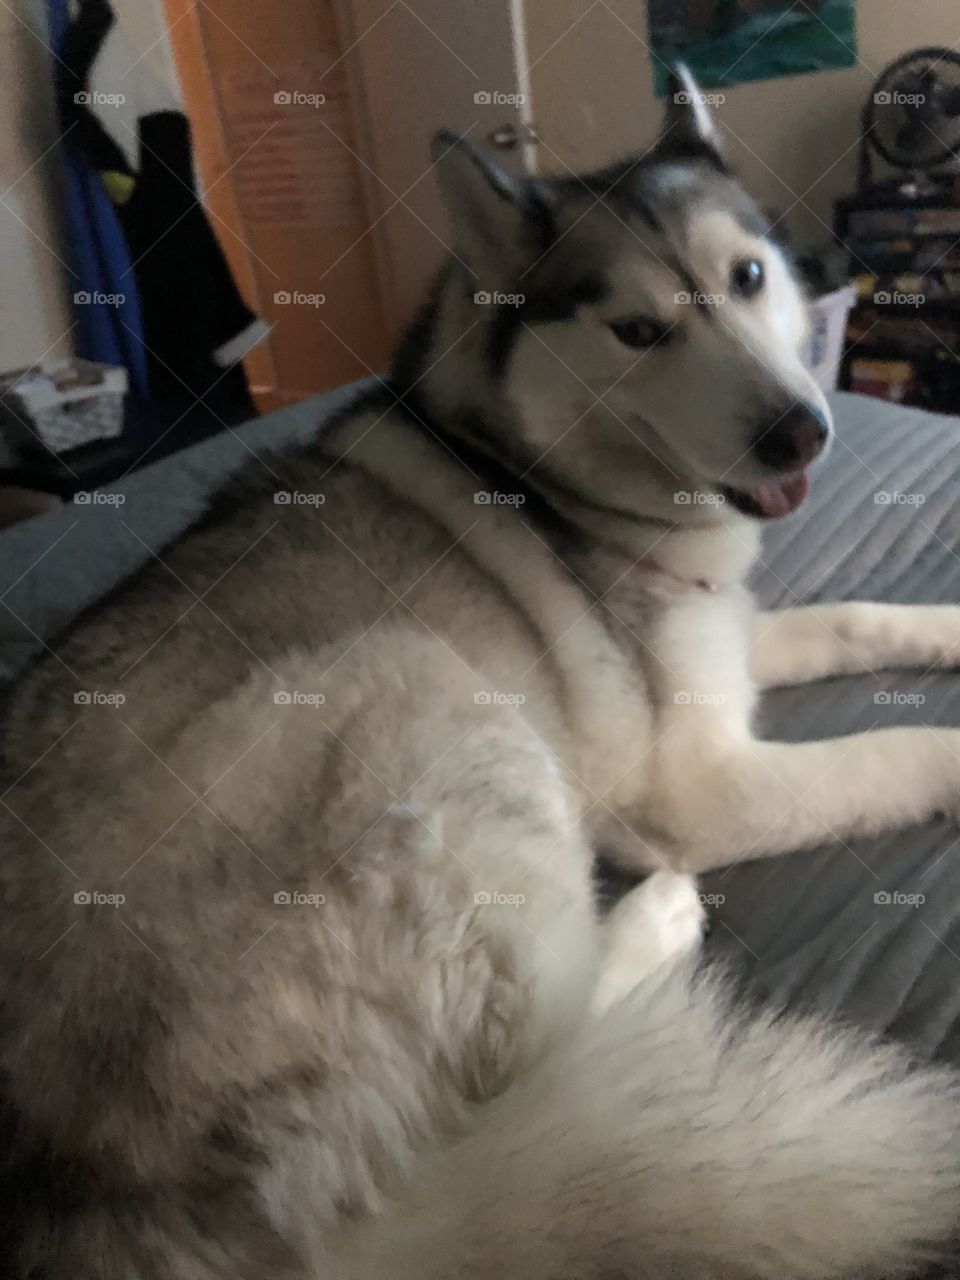 Husky smiling while lying down on bed